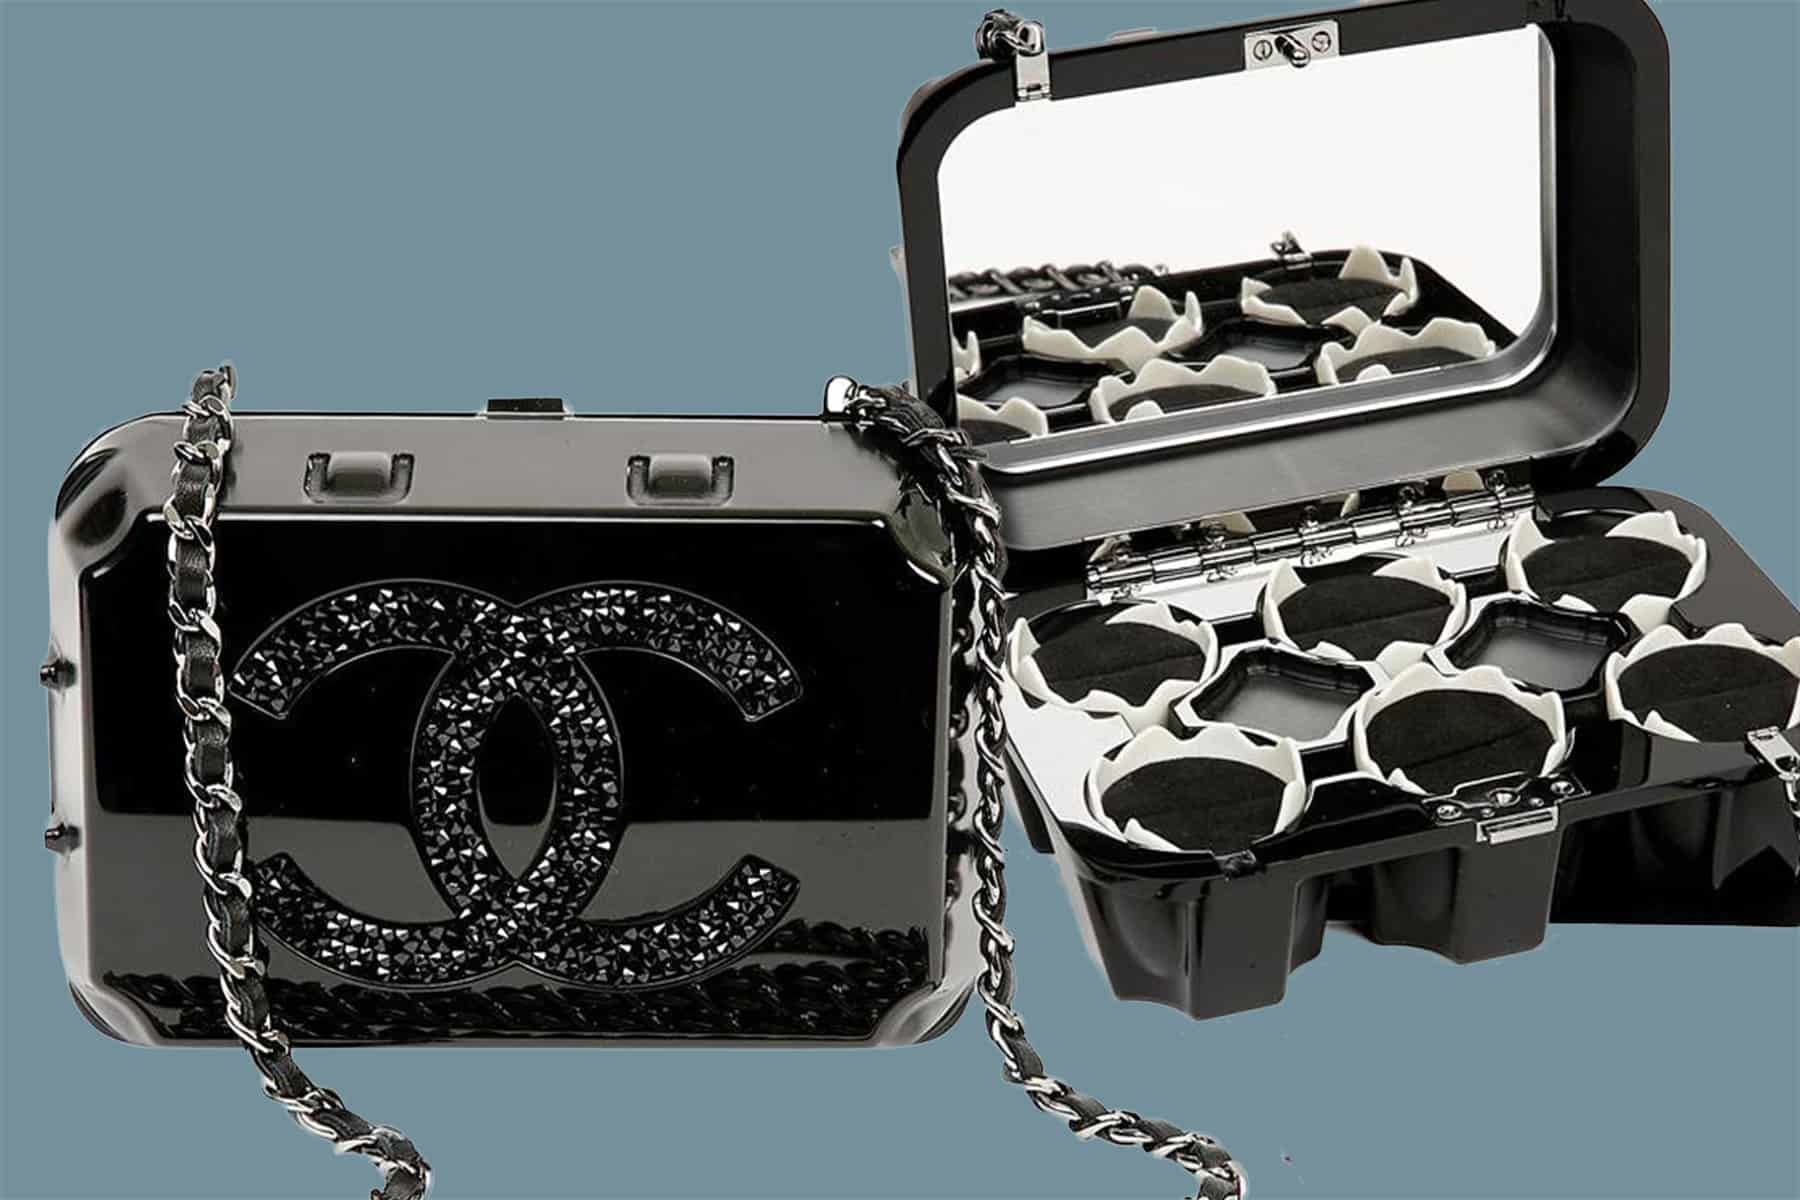 With a Wink, Karl Lagerfeld Sent This Egg-Carton-Shaped Chanel Bag Down the  Runway - The Study